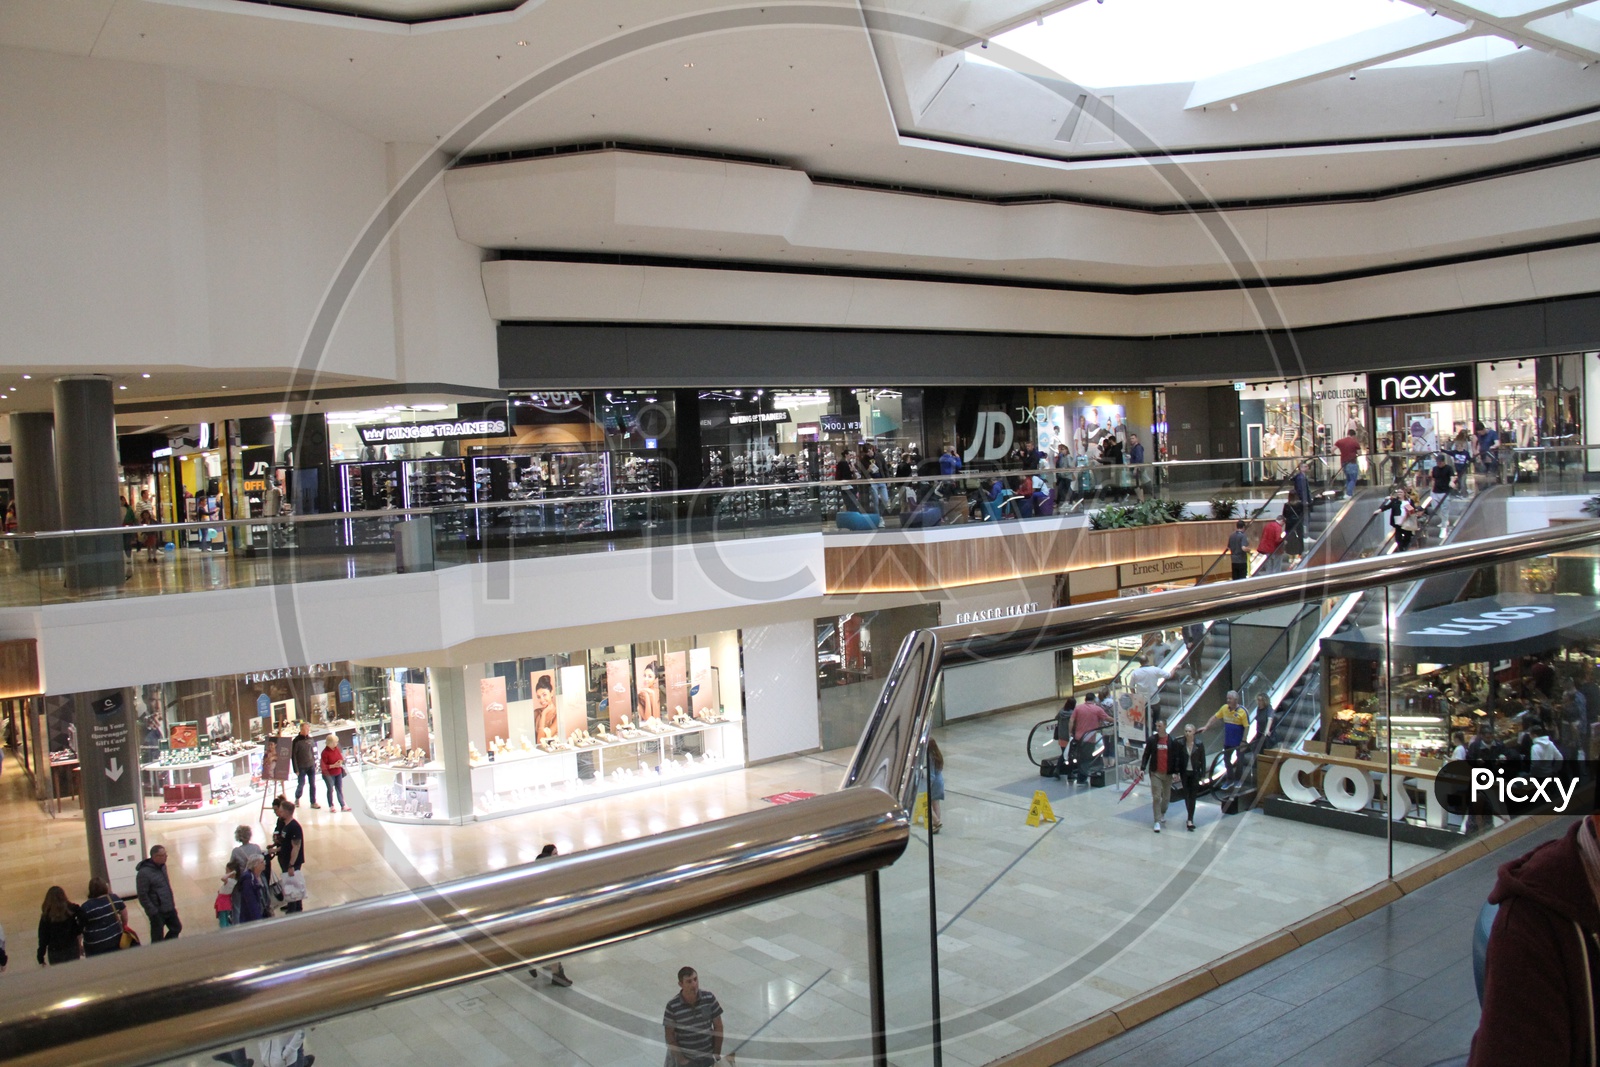 Interiors of a Shopping Mall